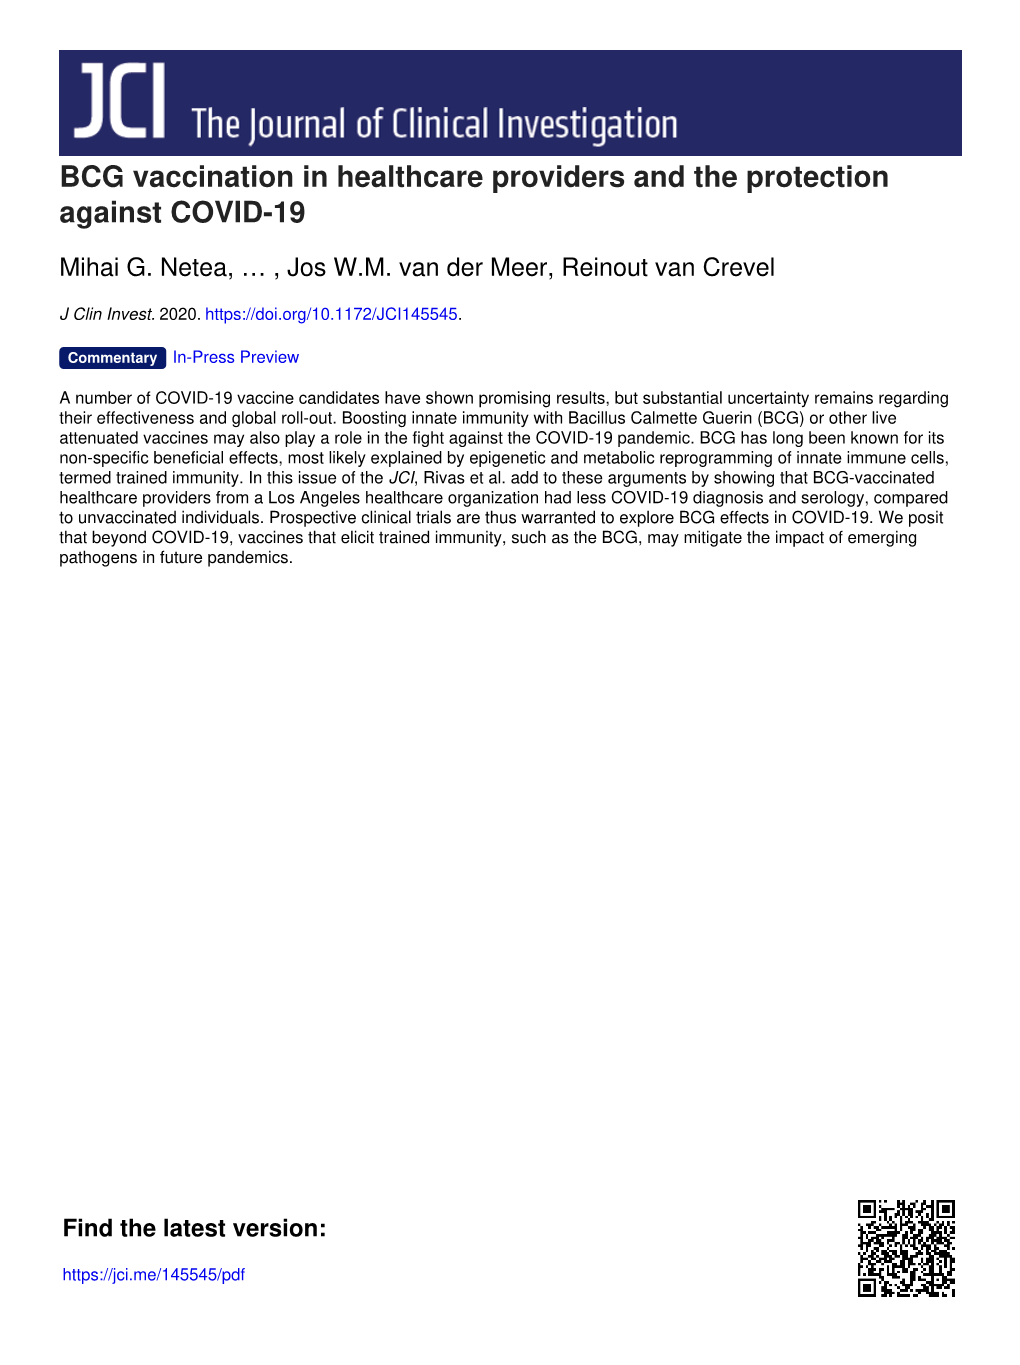 BCG Vaccination in Healthcare Providers and the Protection Against COVID-19